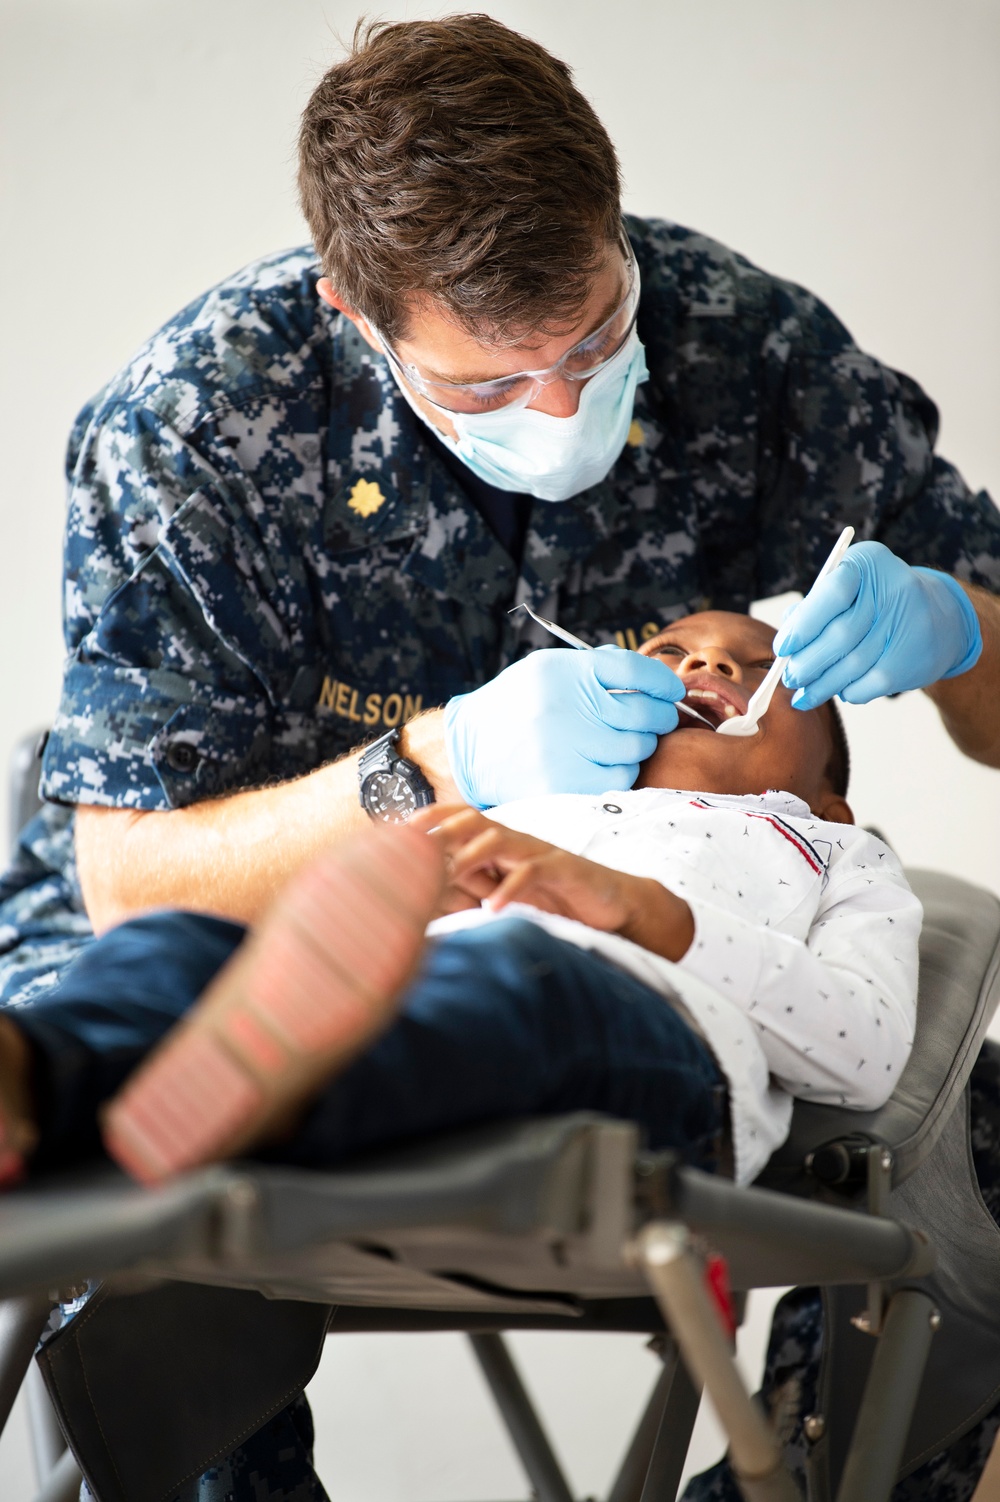 USNS Comfort Personnel Treat Patients at One of Two Medical Sites in Riohacha, Colombia